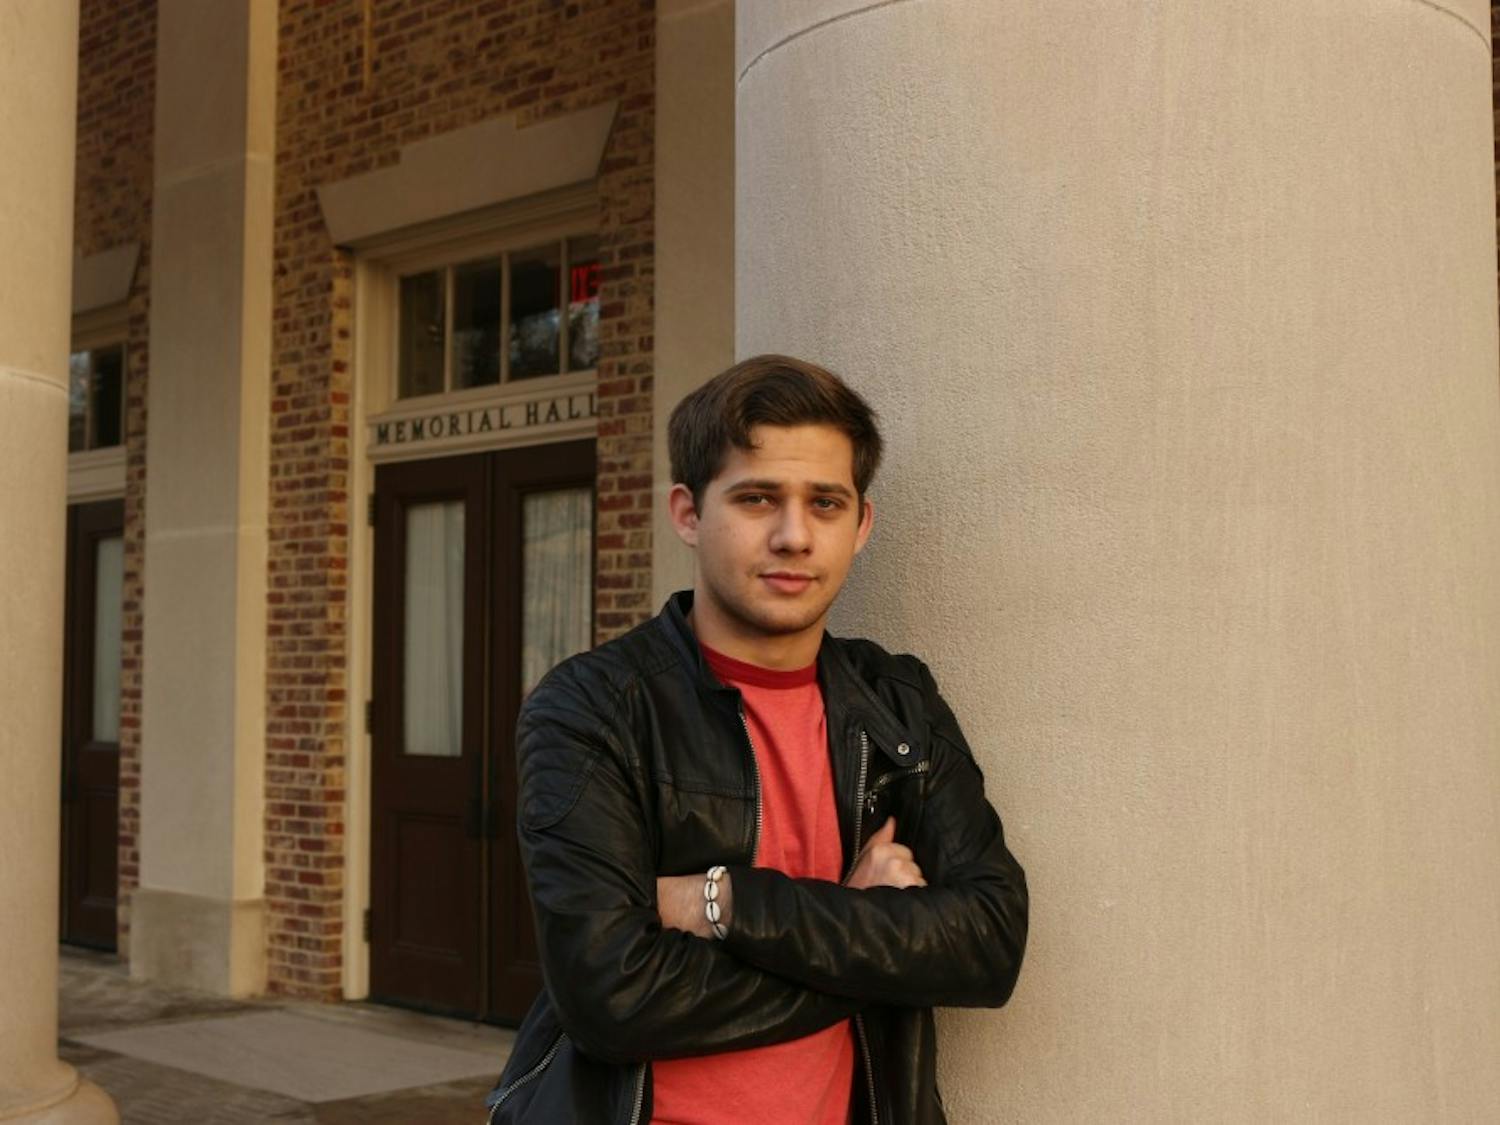 UNC sophomore Michael Perez is currently earning a degree in music with a focus in singing, while also pursuing an acting career. Perez played the role of Jon in the popular Netflix show, "Insatiable" starring Debby Ryan. 